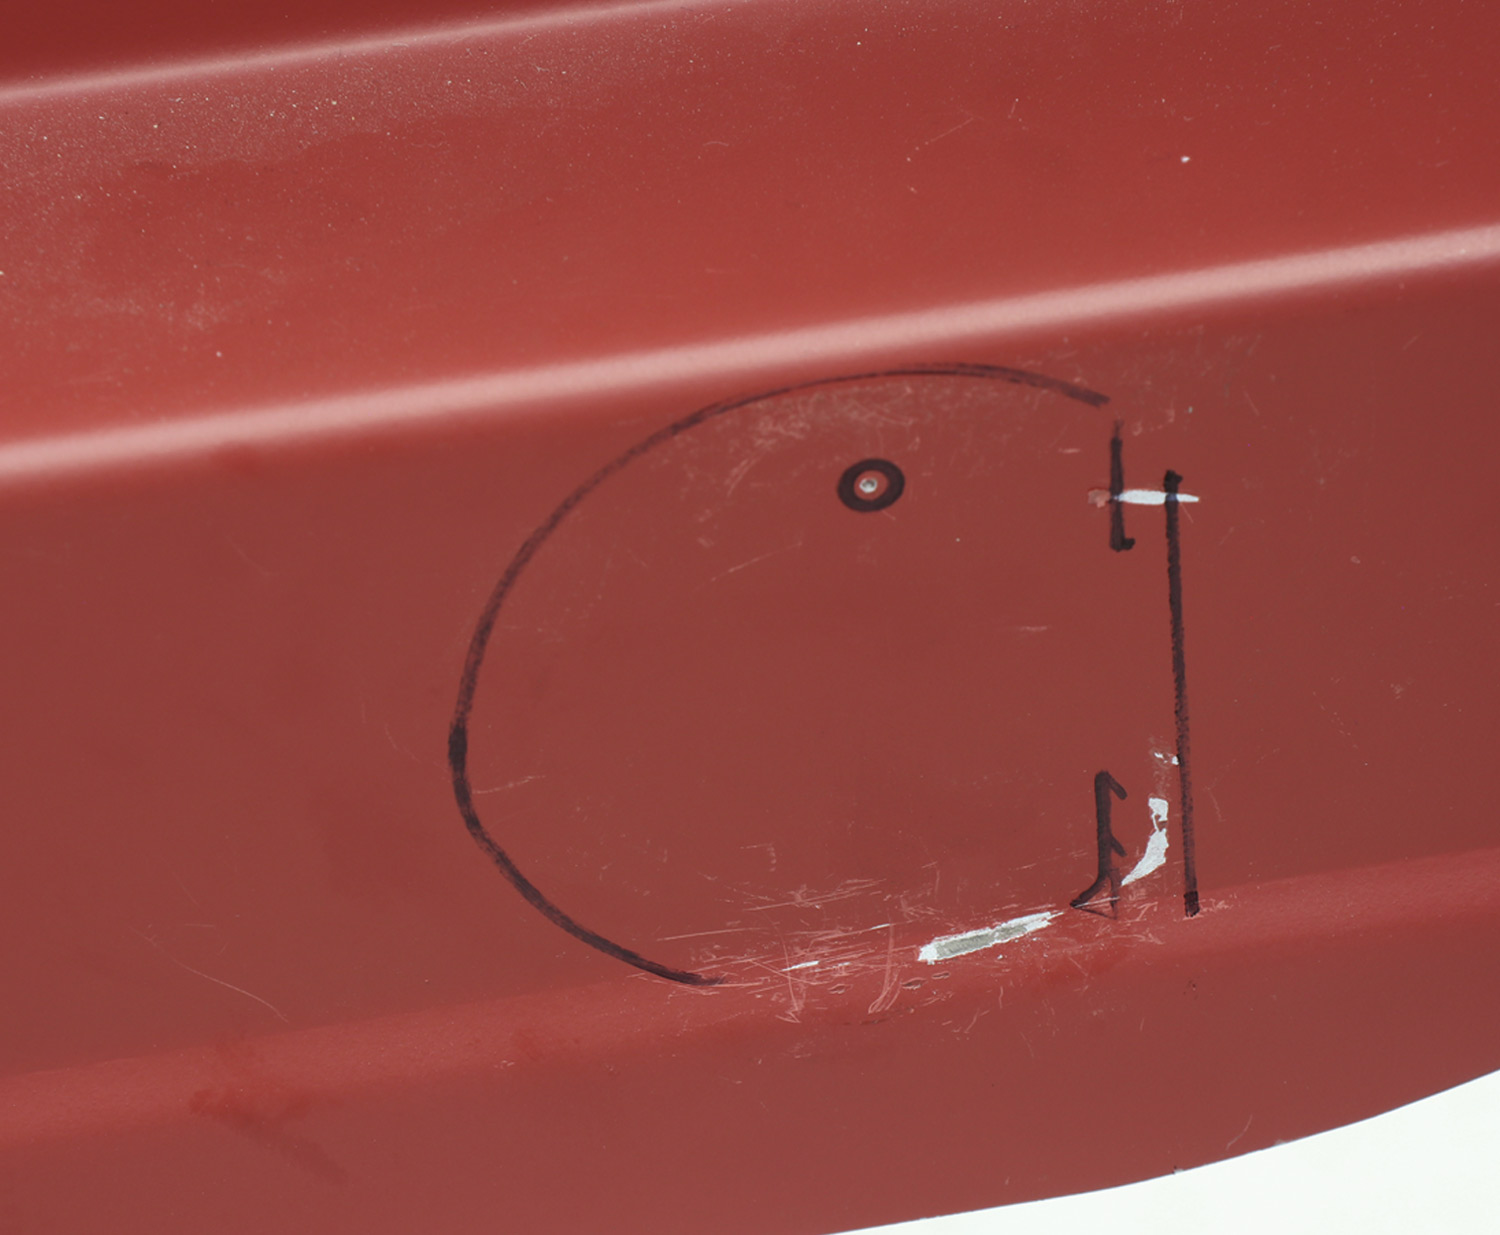 the base of the taillight is traced in trace on the car rear